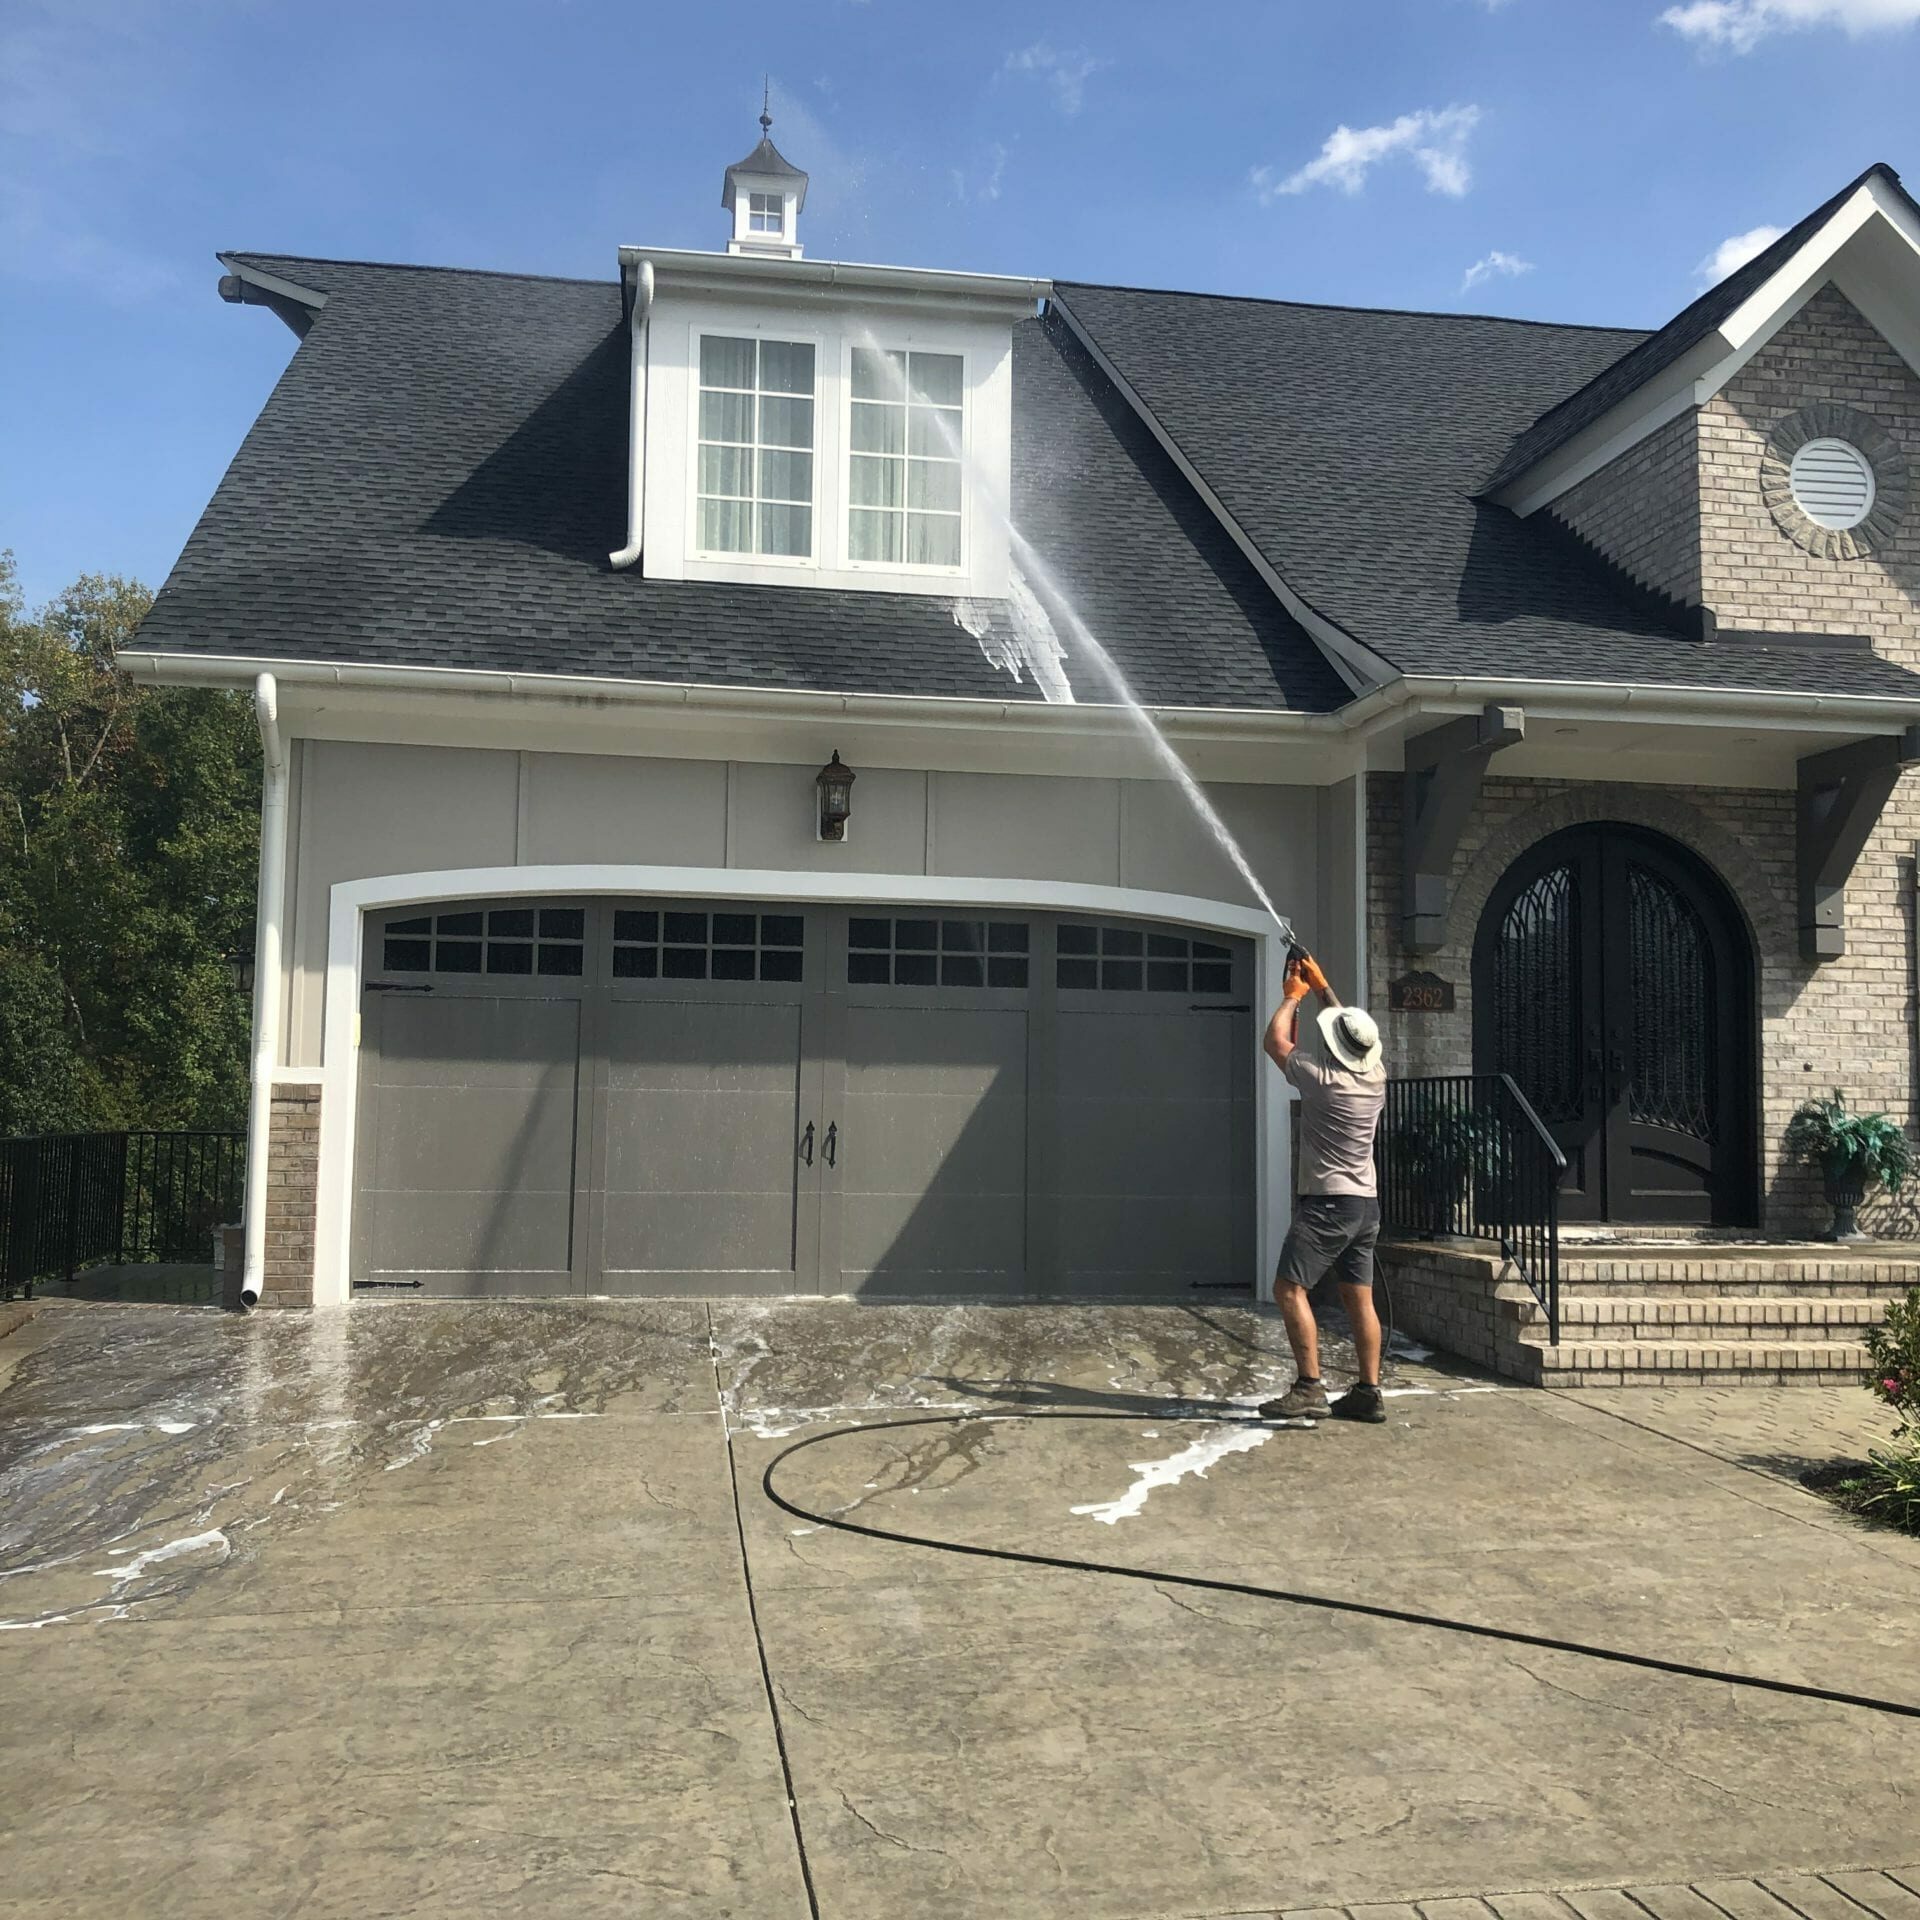 Reyco Pressure Washing & Sealing delivers the professional house washing expertise your property needs to get the most out of the place you call home.